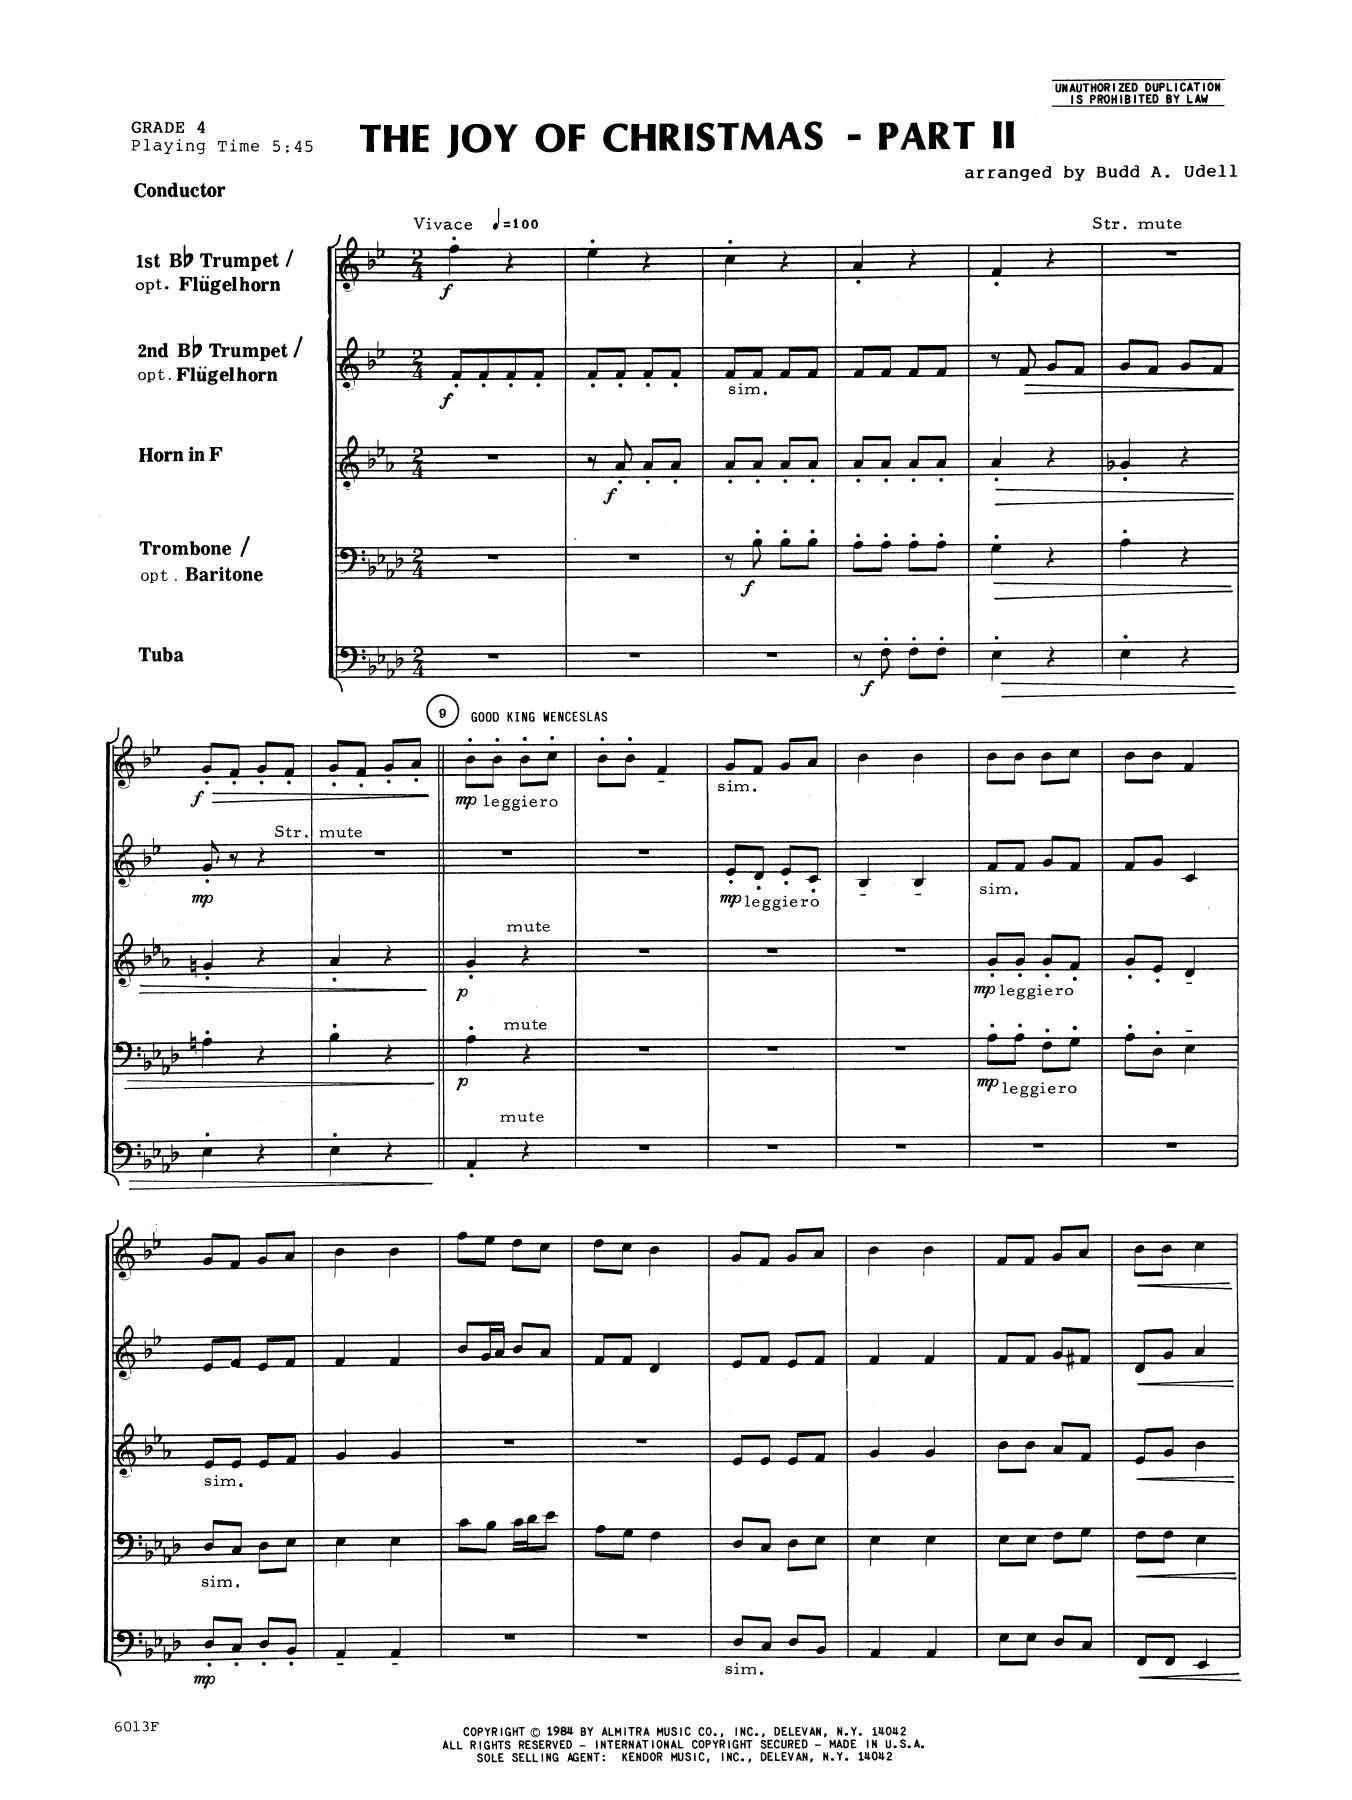 Download Budd A. Udell The Joy of Christmas Part 2 - Full Scor Sheet Music